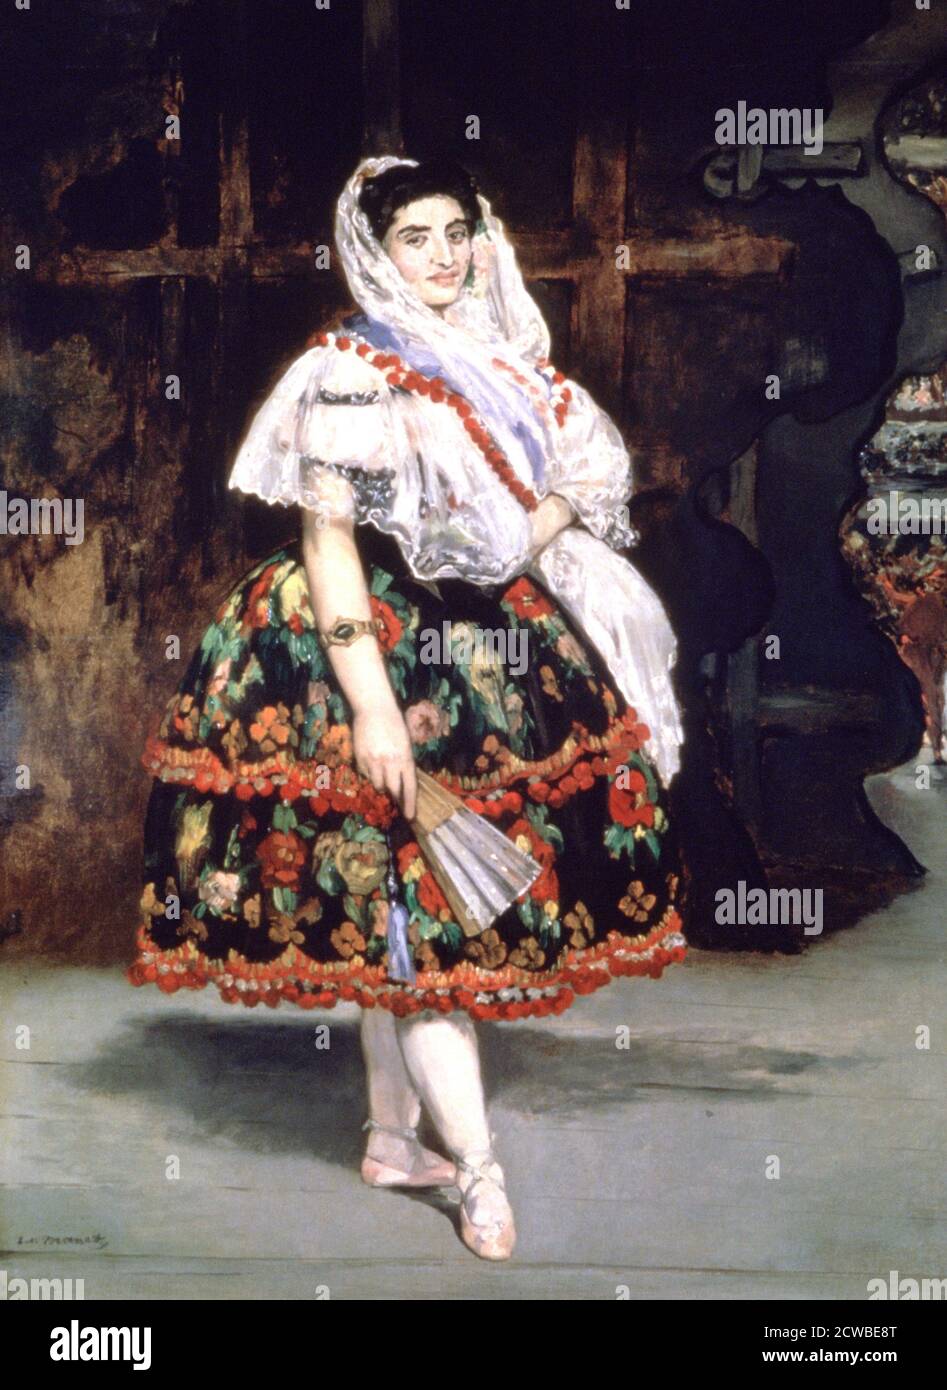 Lola de Valence', 1862. Artist: Edouard Manet. Edouard Manet(1832-1883) was a French modernist painter. He was one of the first 19th-century artists to paint modern life. Stock Photo